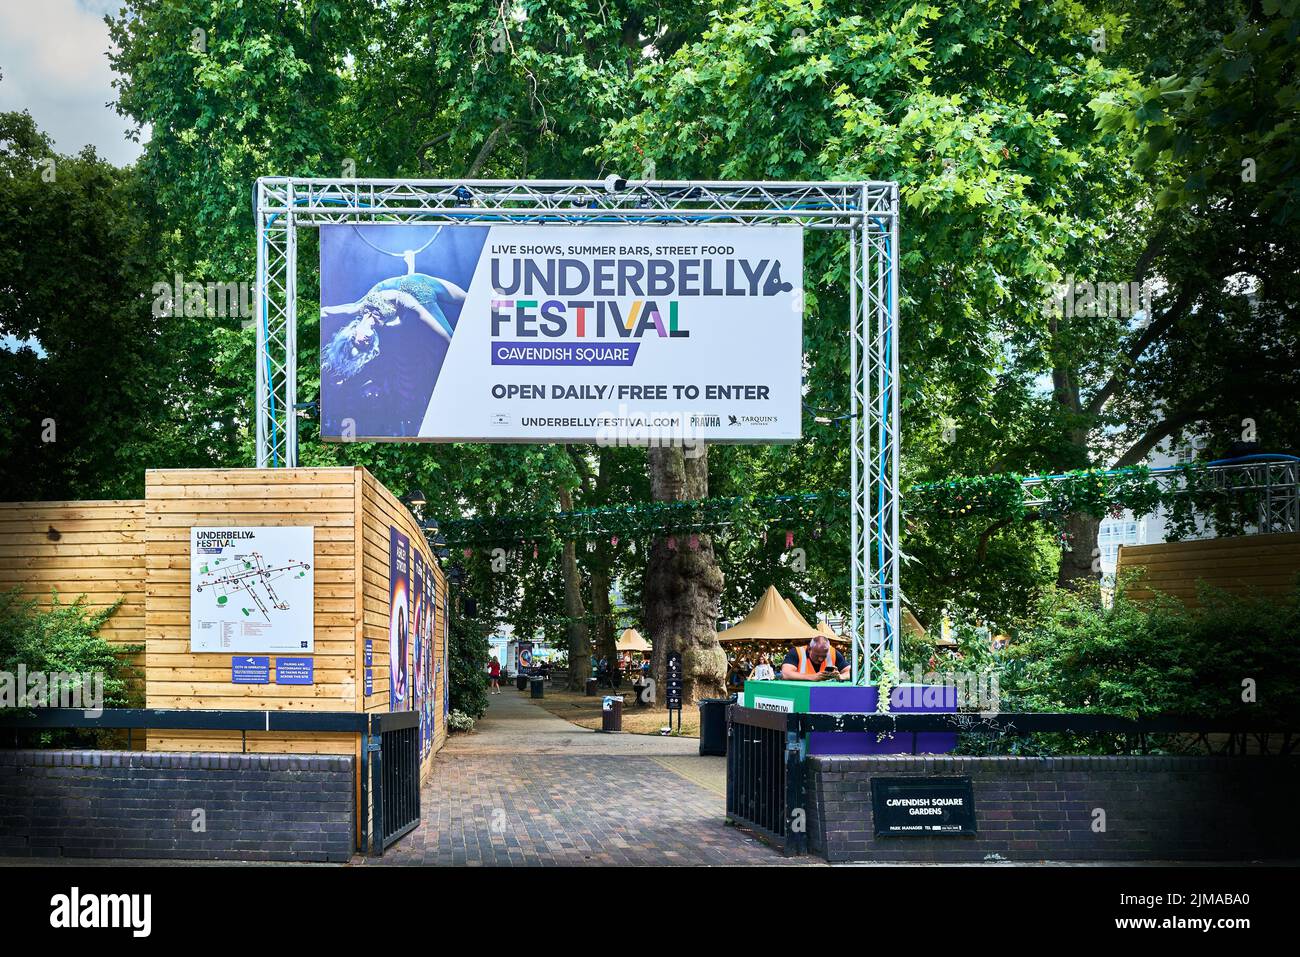 Underbelly festival at Cavendish square, London, July 2022. Stock Photo